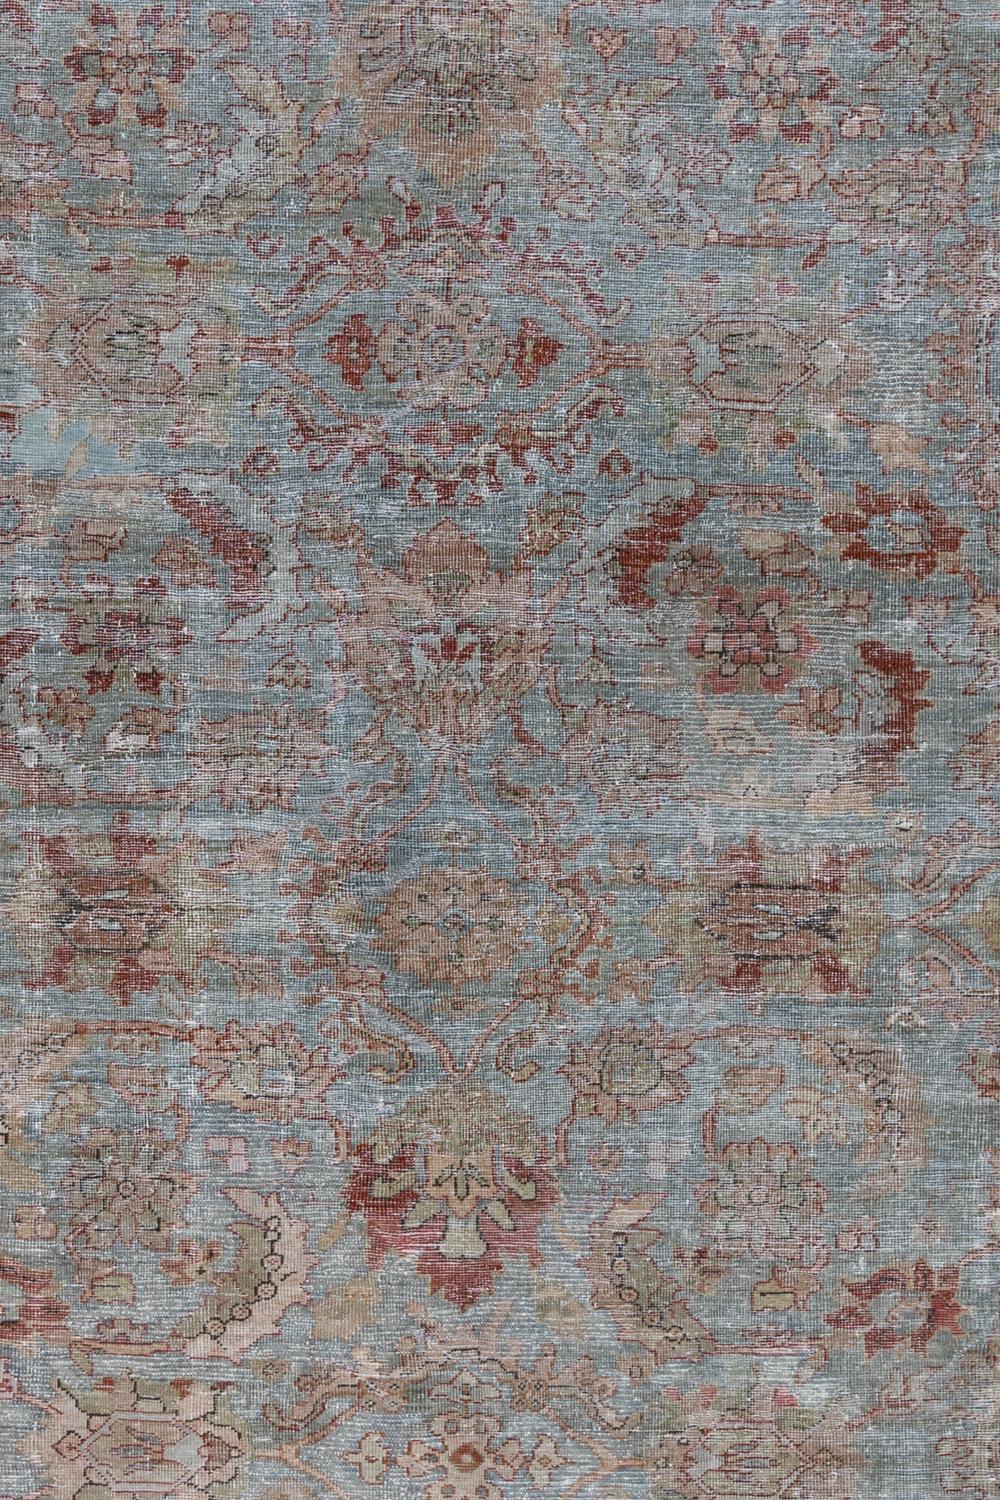 Age: second quarter of the 20th century 

Pile: low

Wear Notes: 3

Material: Wool on cotton 

Vintage rugs are made by hand over the course of months, sometimes years. Their imperfections and wear are evidence of the hard working human hands that